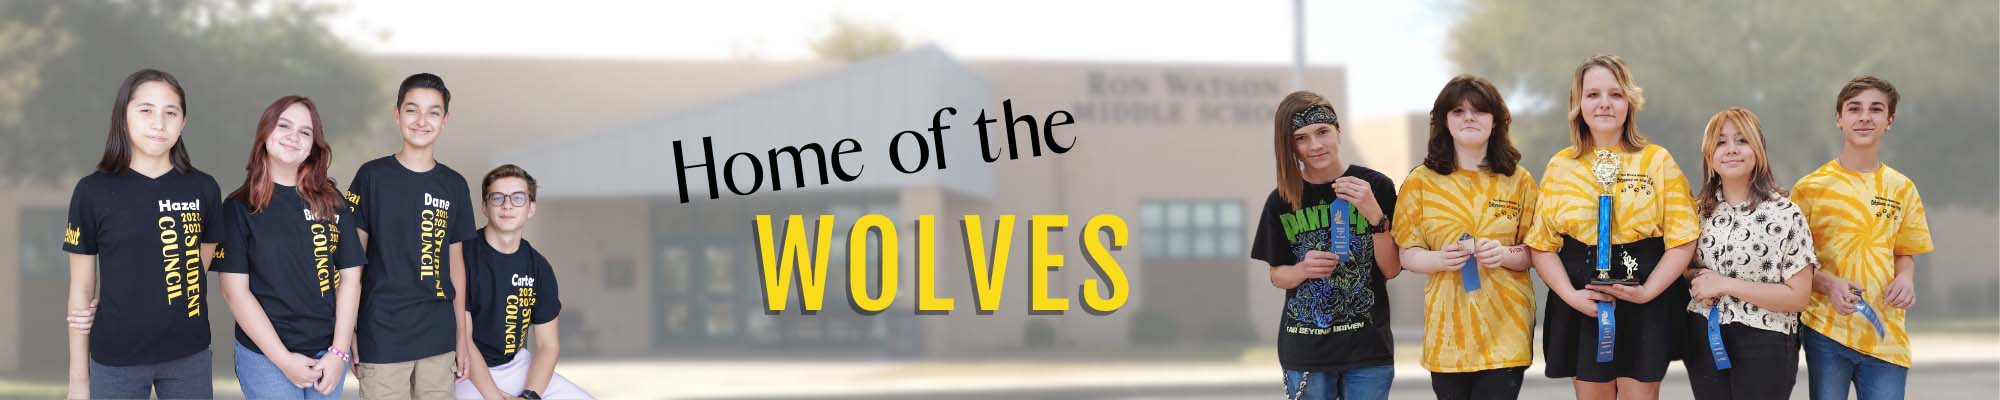 Students in school shirts and graphic that says Home of the Wolves